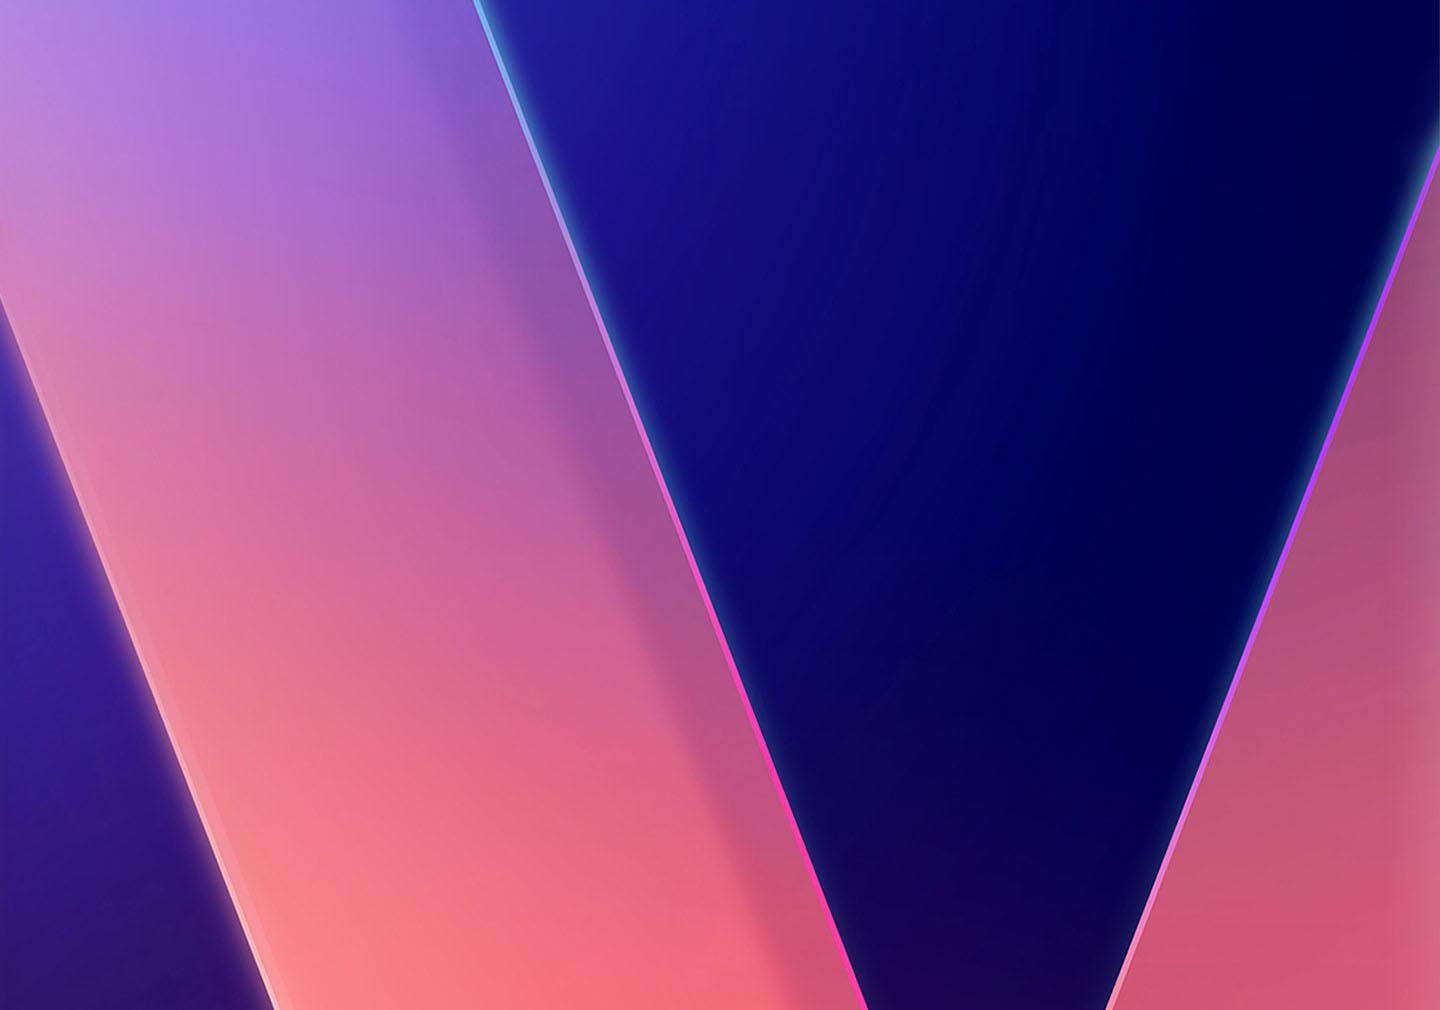 Download the All New LG V30 Stock Wallpaper for Your Device